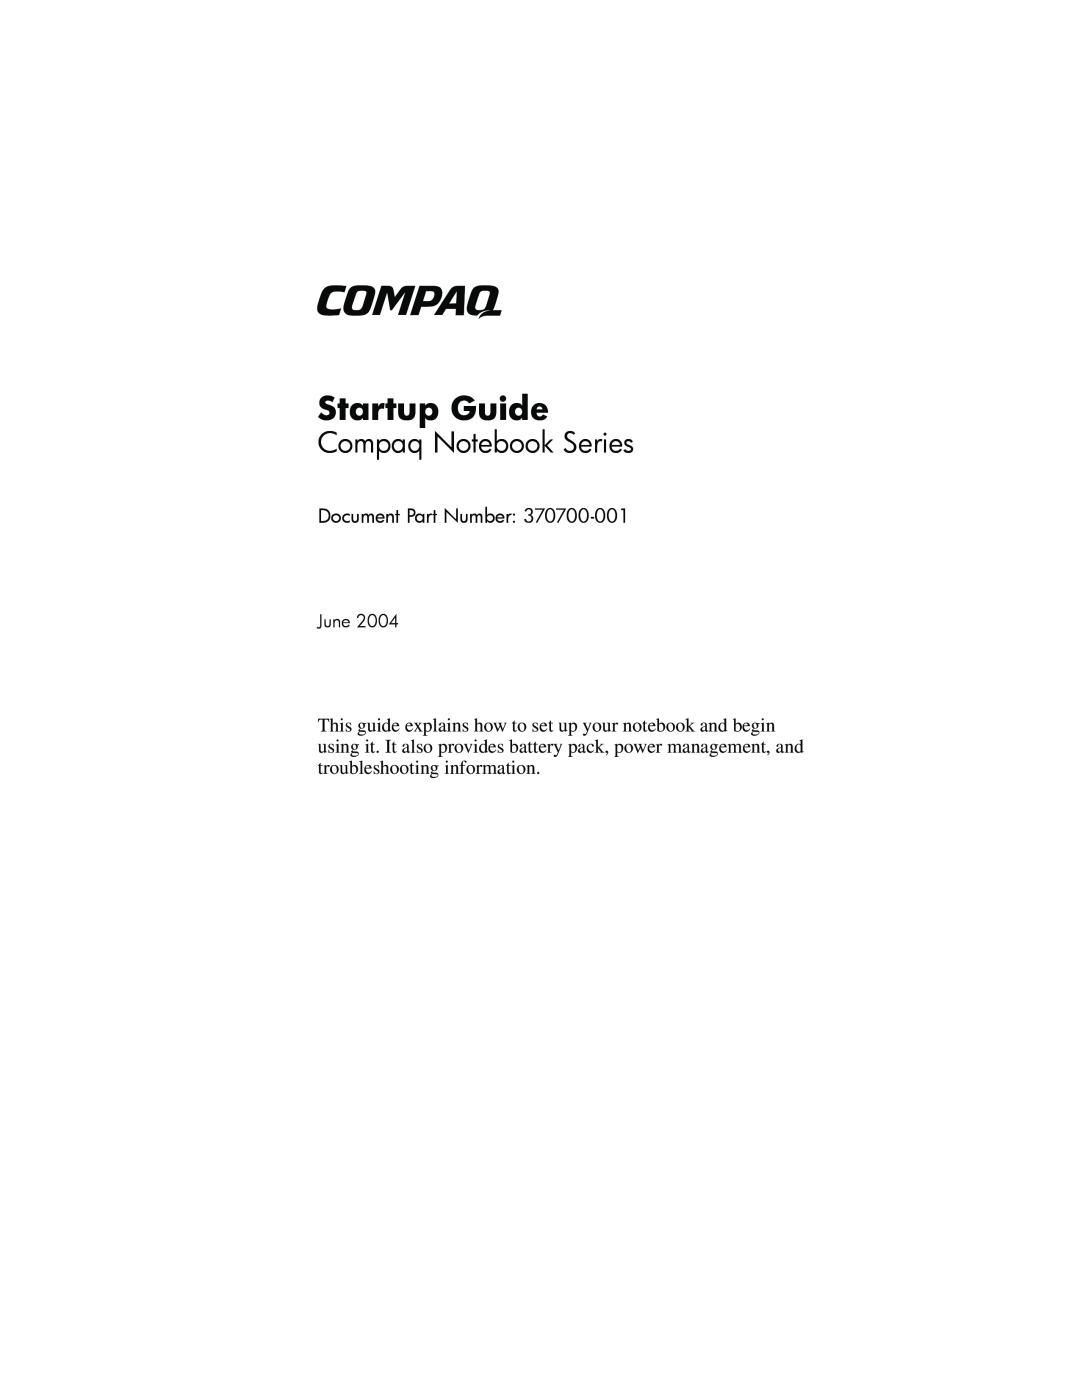 Compaq Personal Computer manual Startup Guide, Compaq Notebook Series, Document Part Number, June 